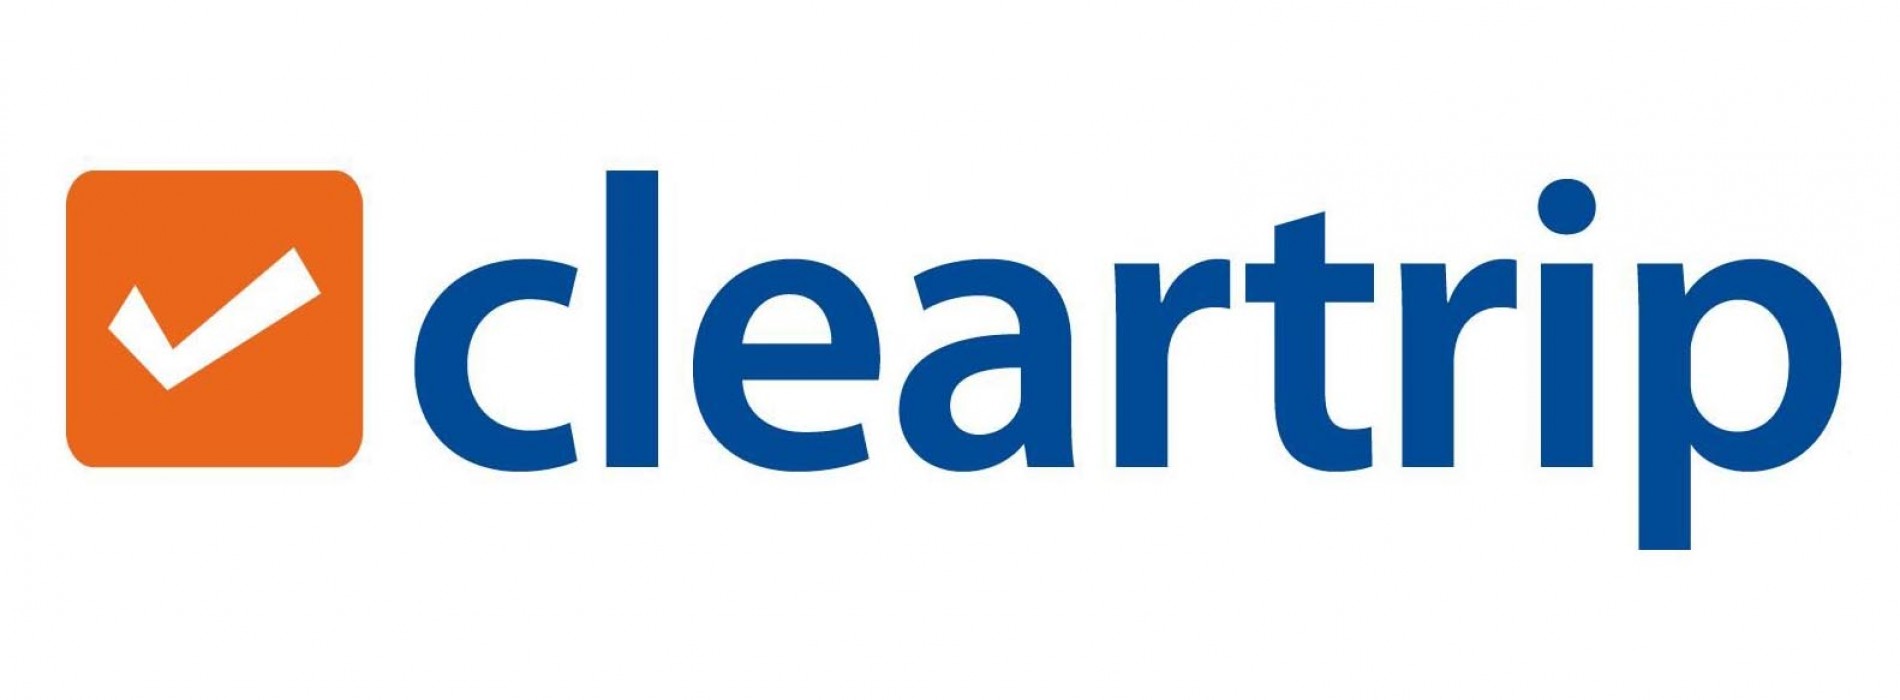 Cleartrip enters into a partnership with Haryana Tourism